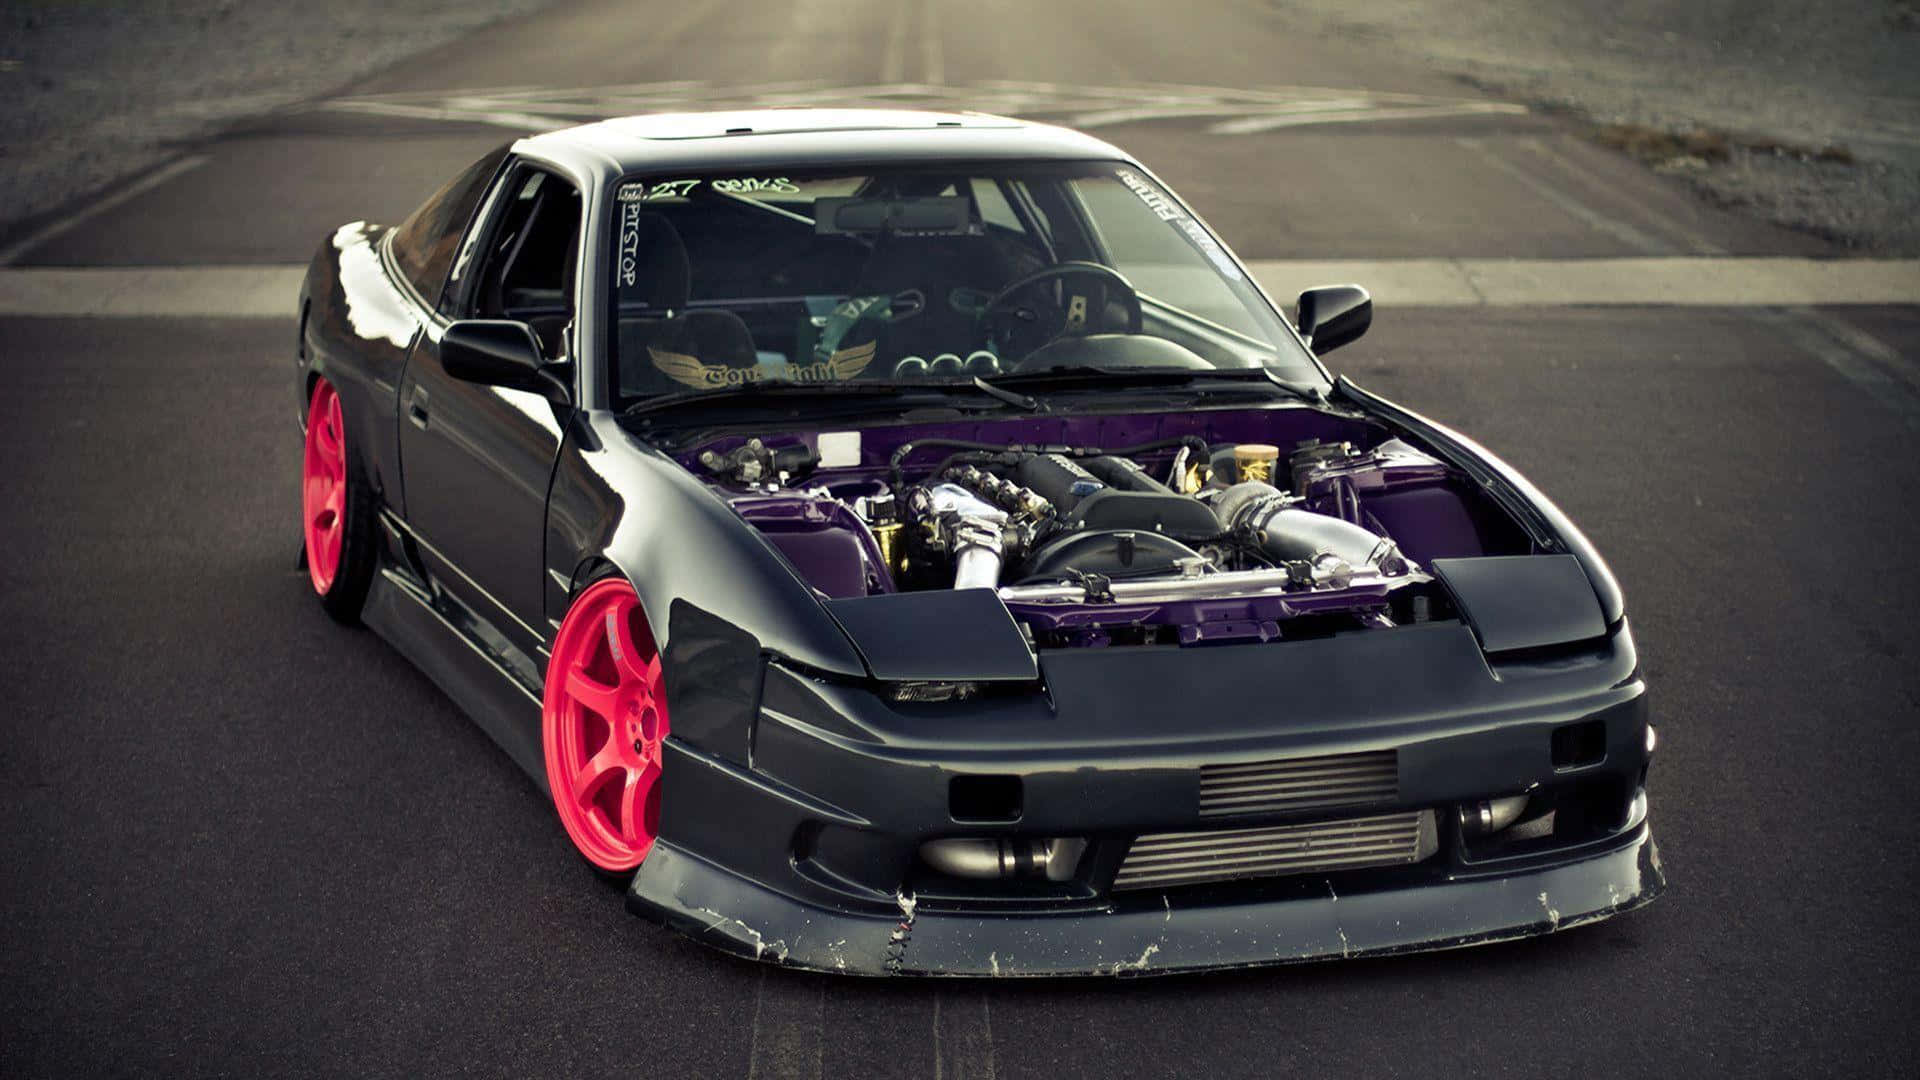 Frictionless Motor Performance: The Nissan Silvia S13 Wallpaper